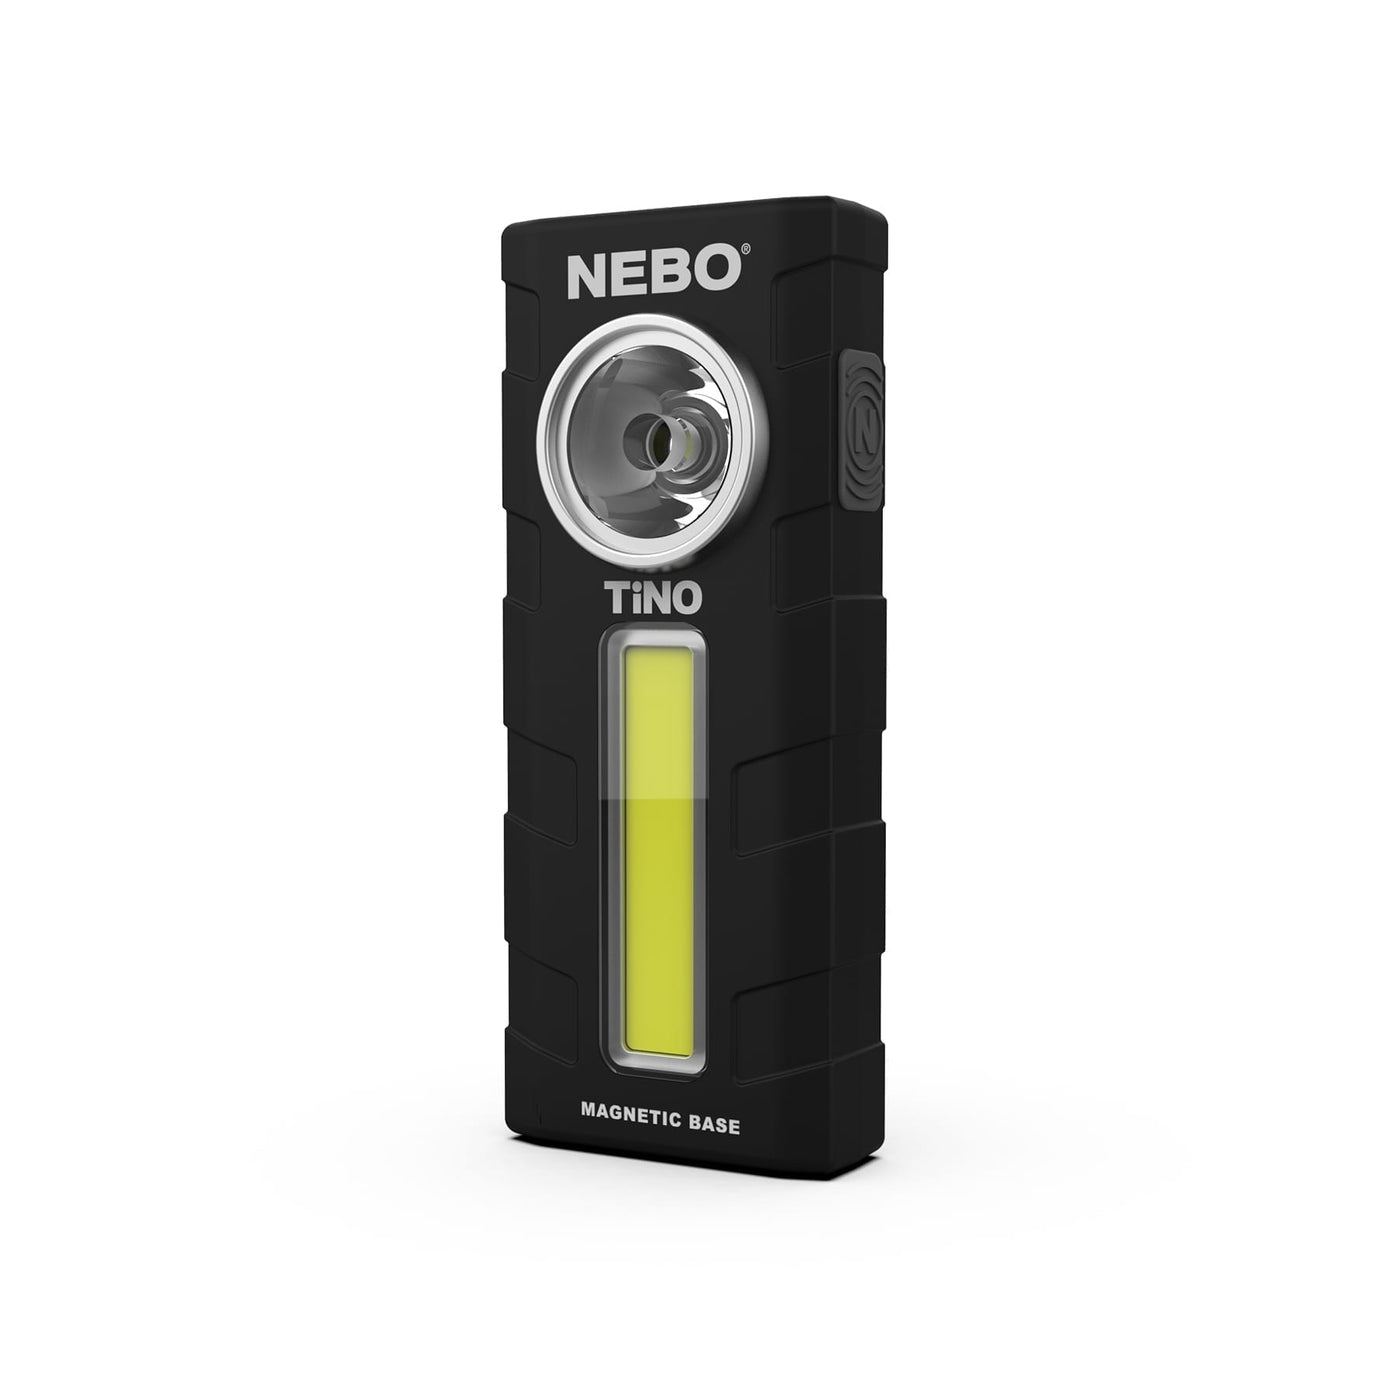 At Nebo Tools, we continually innovate so that we can offer the highest quality LED lighting products at the best price. The TiNO is a thin, ergonomic pocket light that features a 300 lumen spot light and a 250 lumen COB work light. Equipped with full dimming and Power Memory Recall, the TiNO also features a pocket clip, collapsible hanging hook and powerful magnetic base for convenient hands-free lighting.